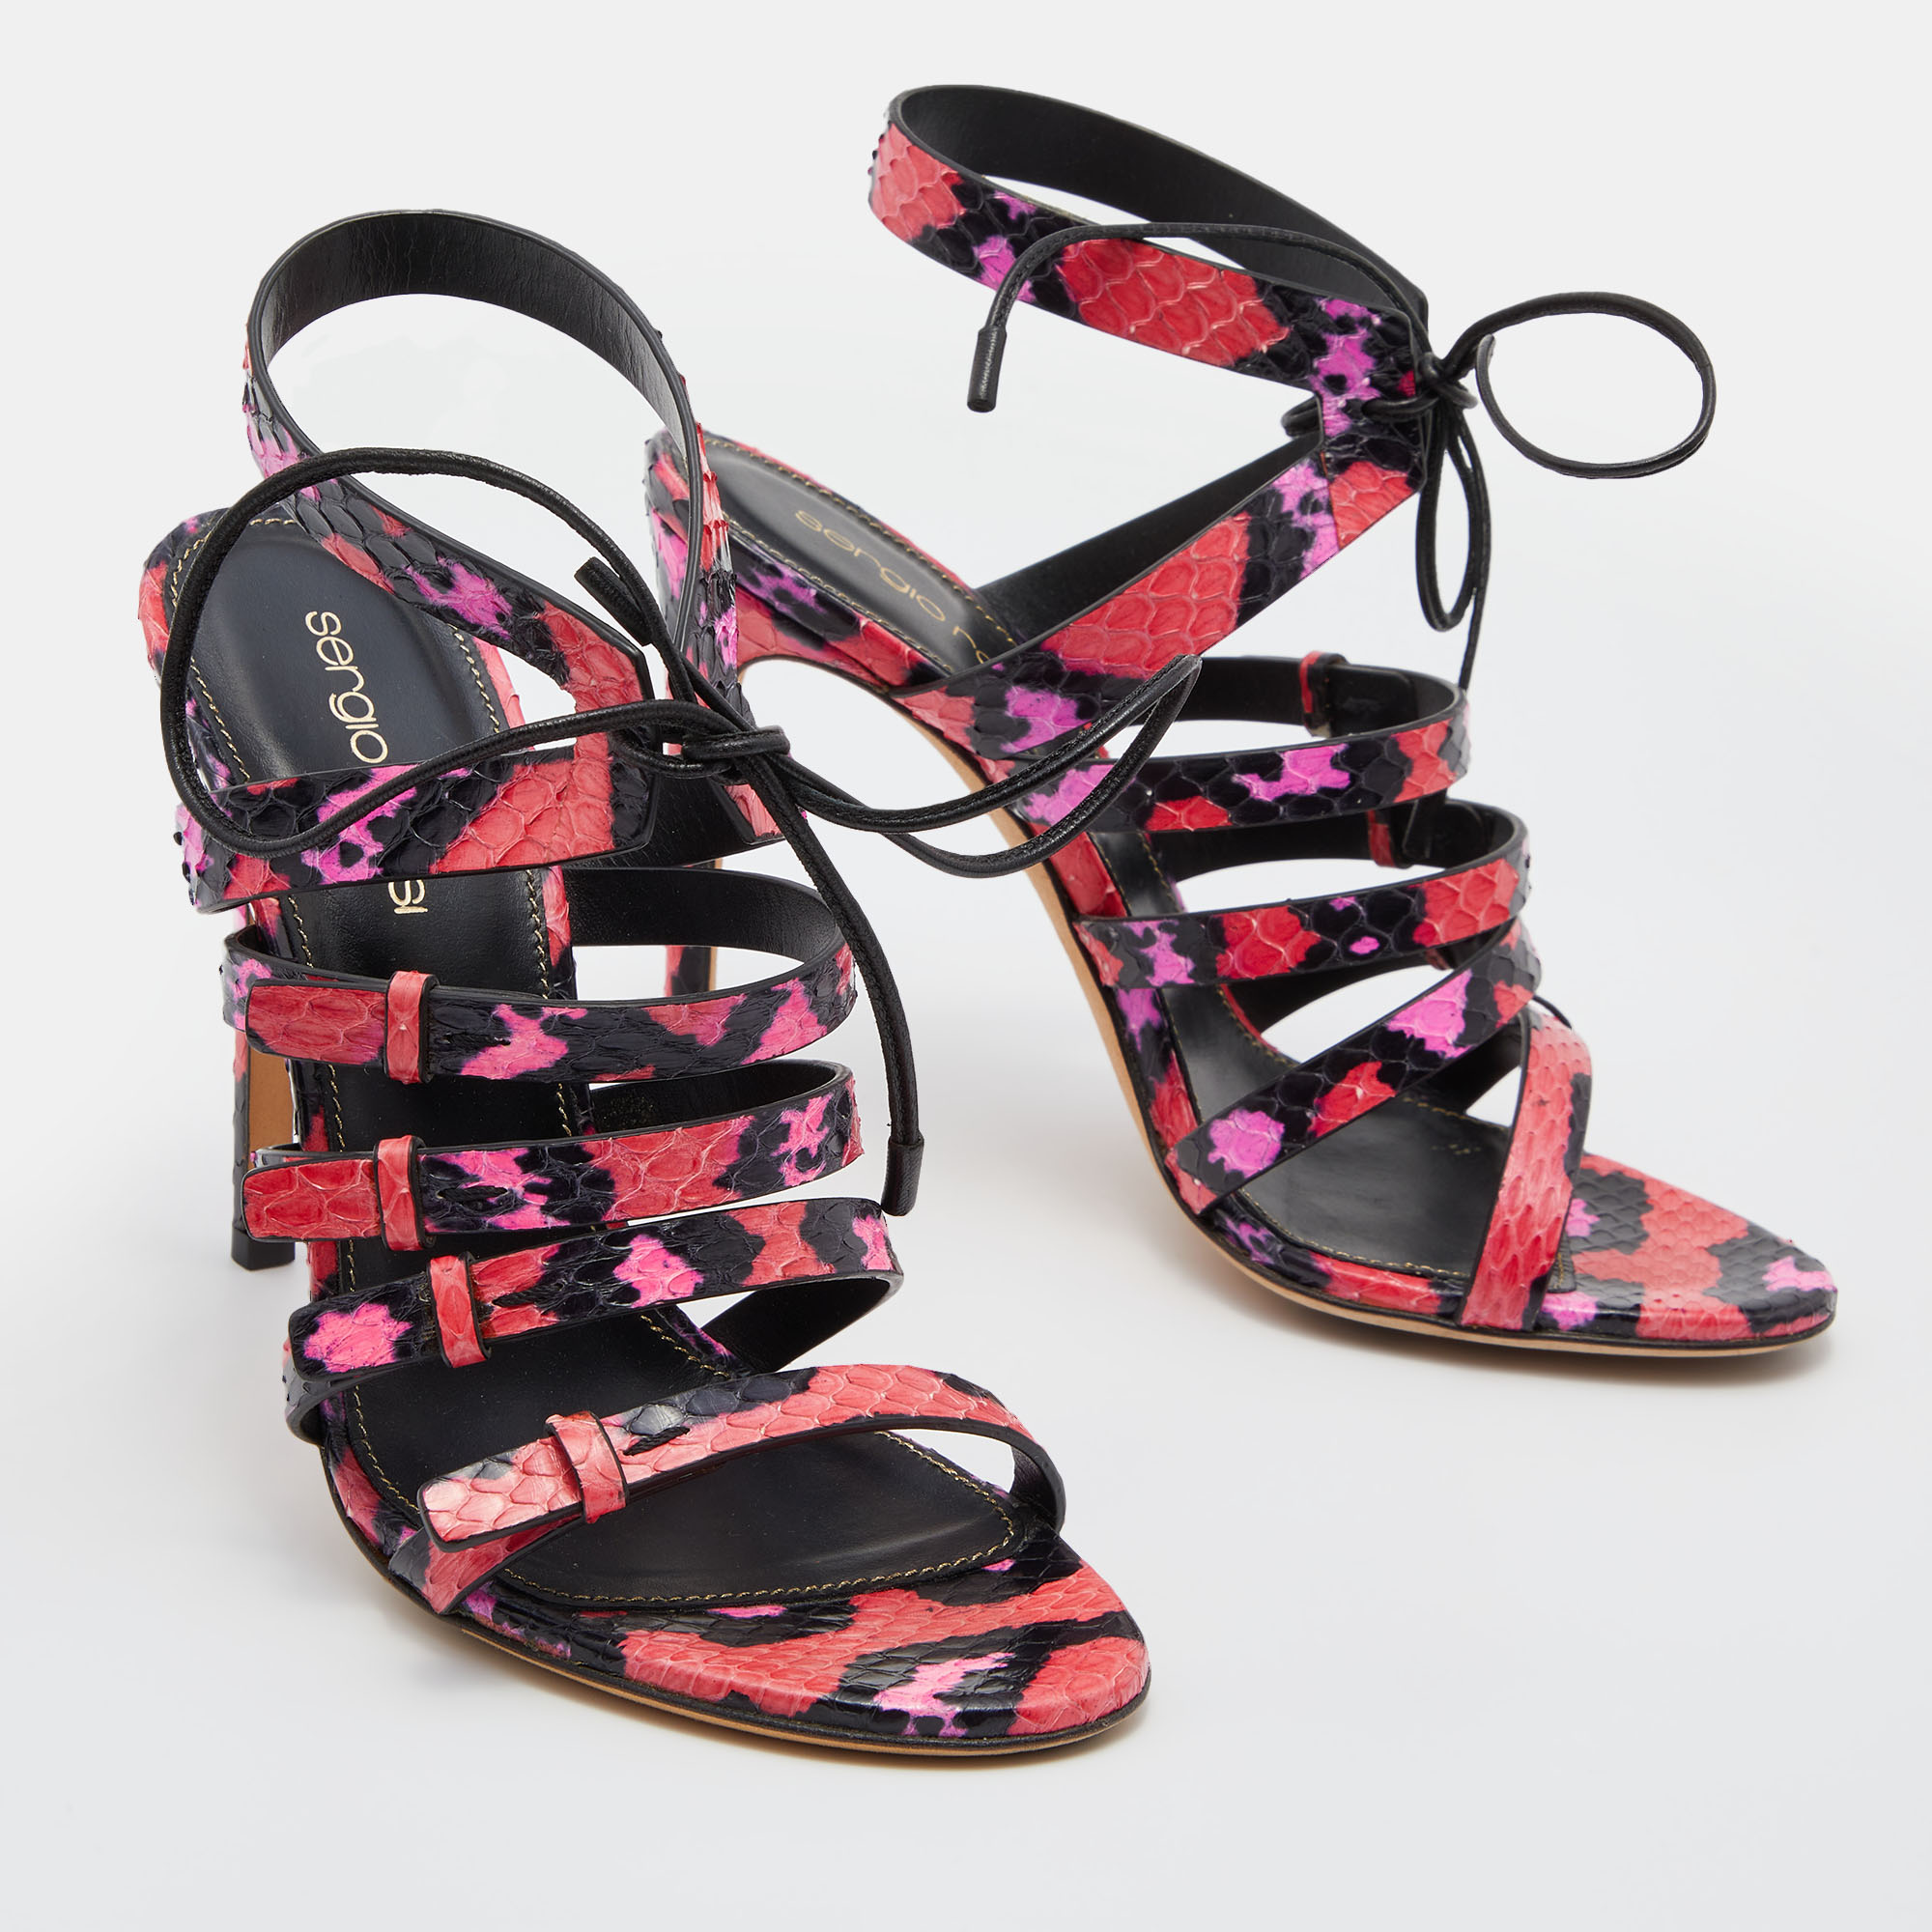 Sergio Rossi Pink/Black Python Leather Ankle Tie Up Strappy Sandals Size 36